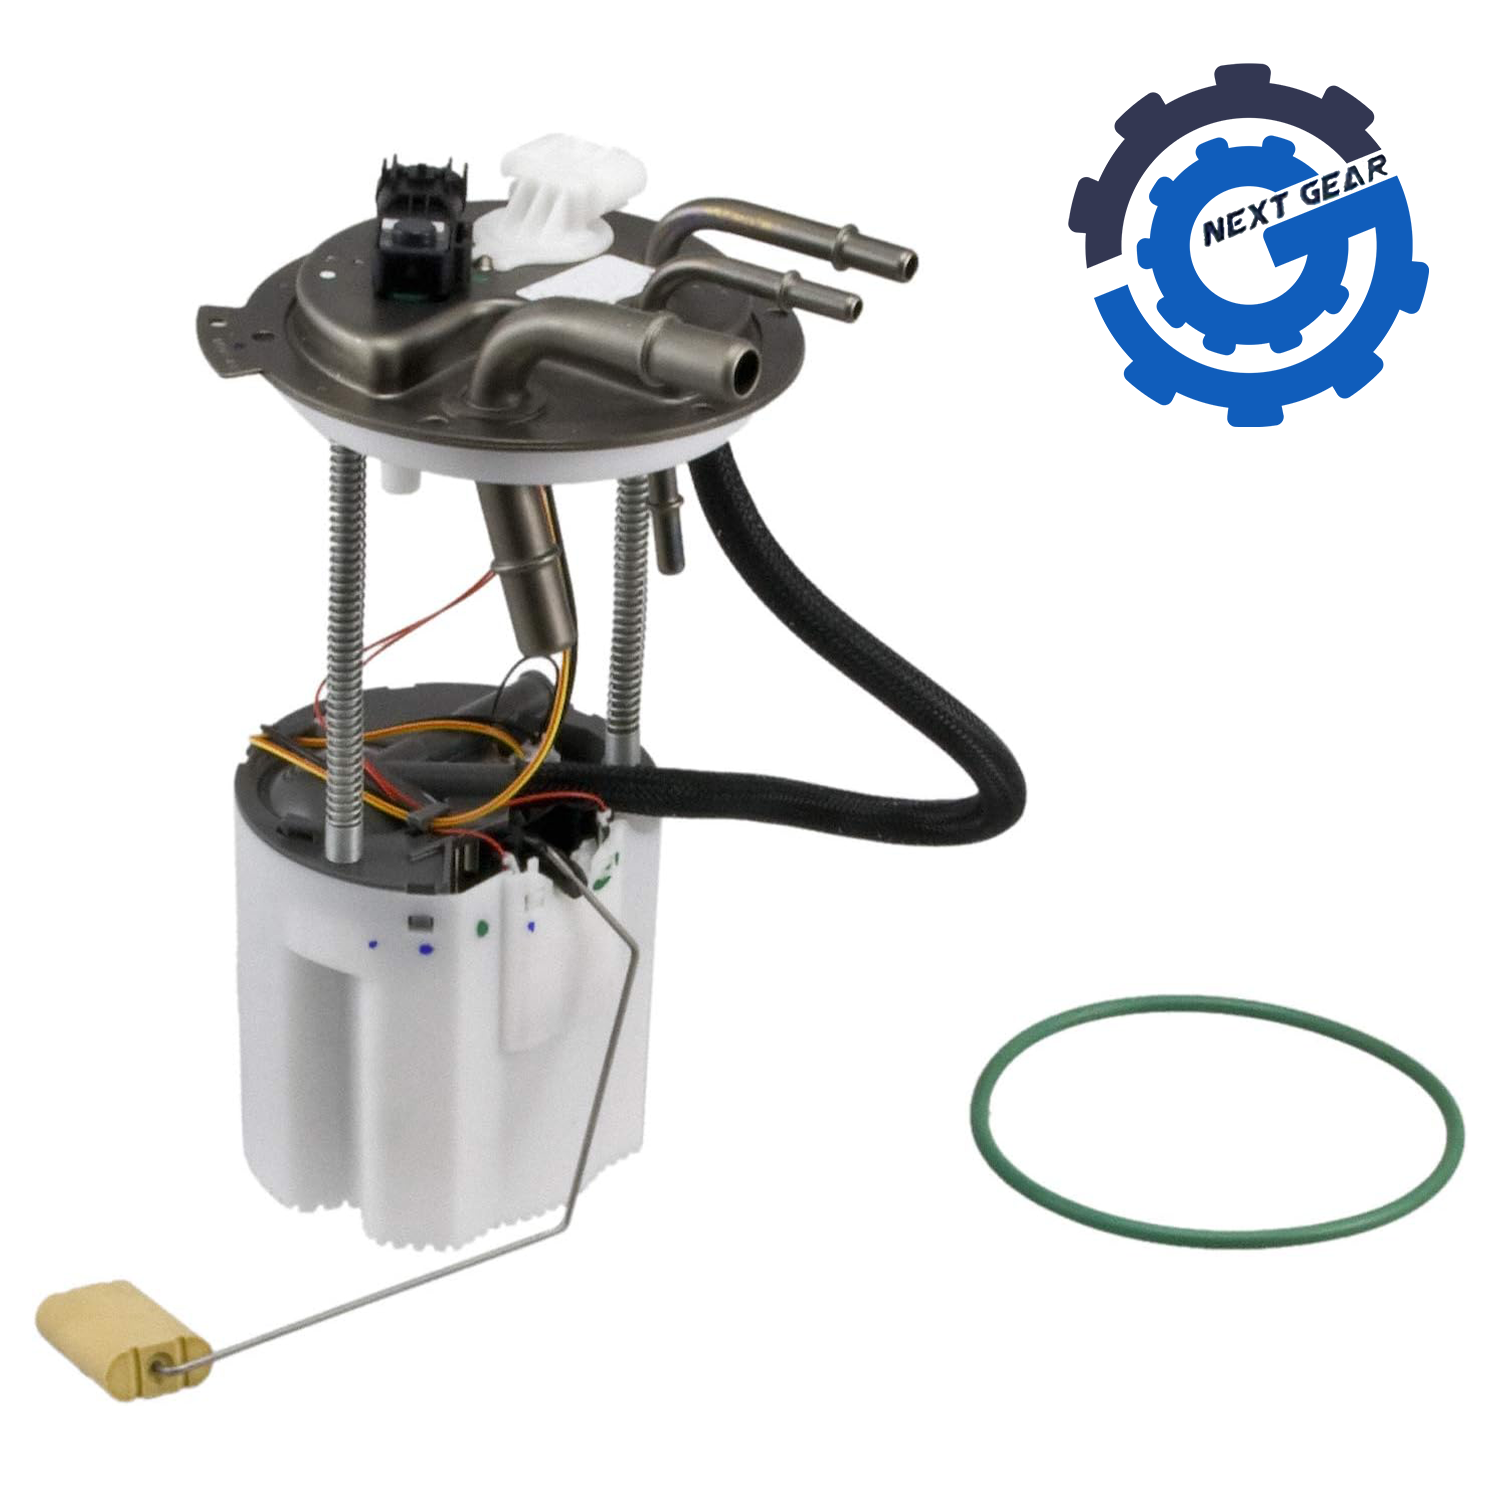 Primary image for New Carter Fuel Pump Module for 2008-2013 Escalade Tahoe Yukon P76299M